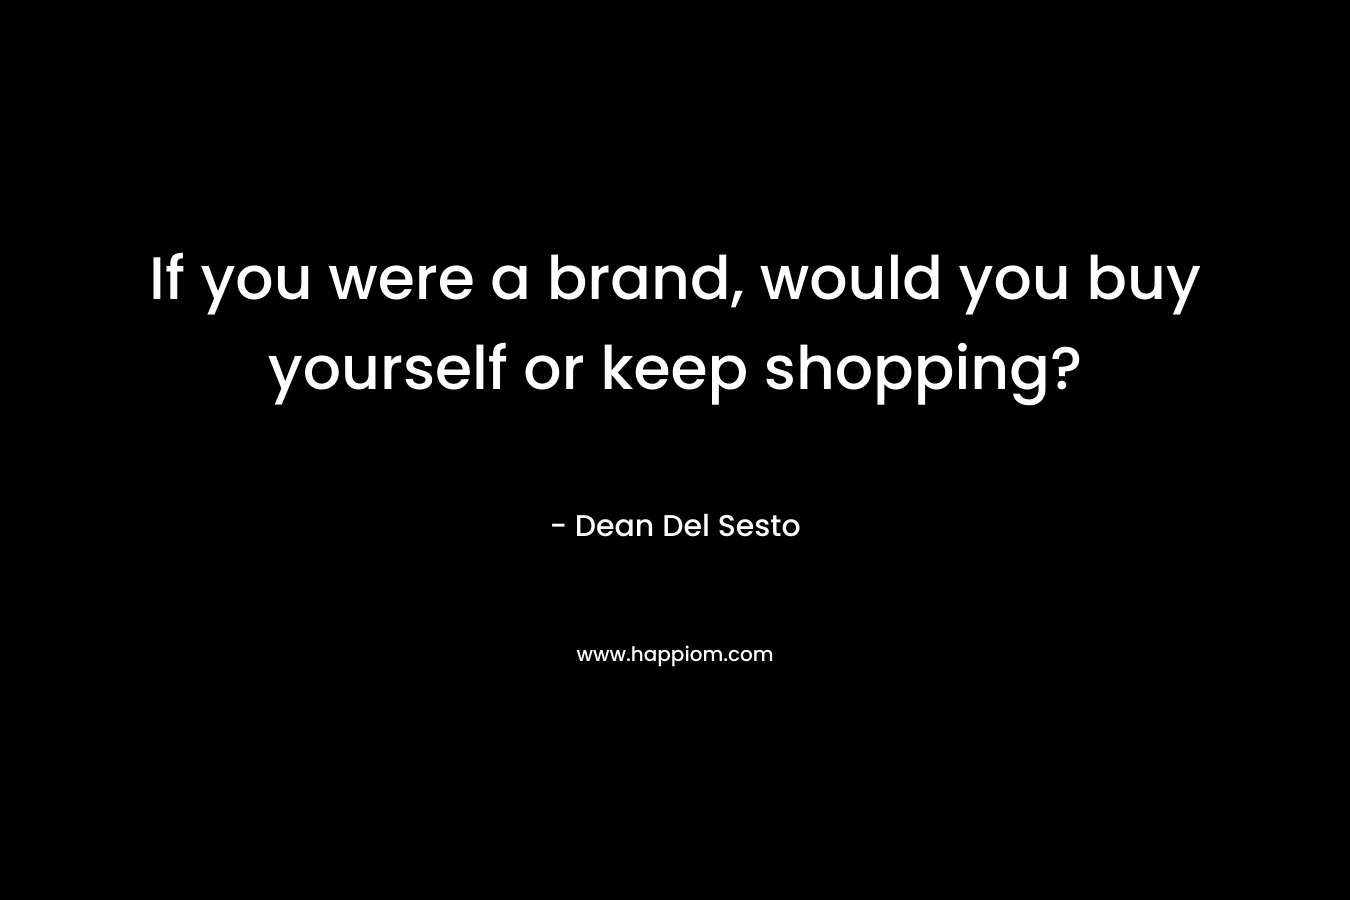 If you were a brand, would you buy yourself or keep shopping?